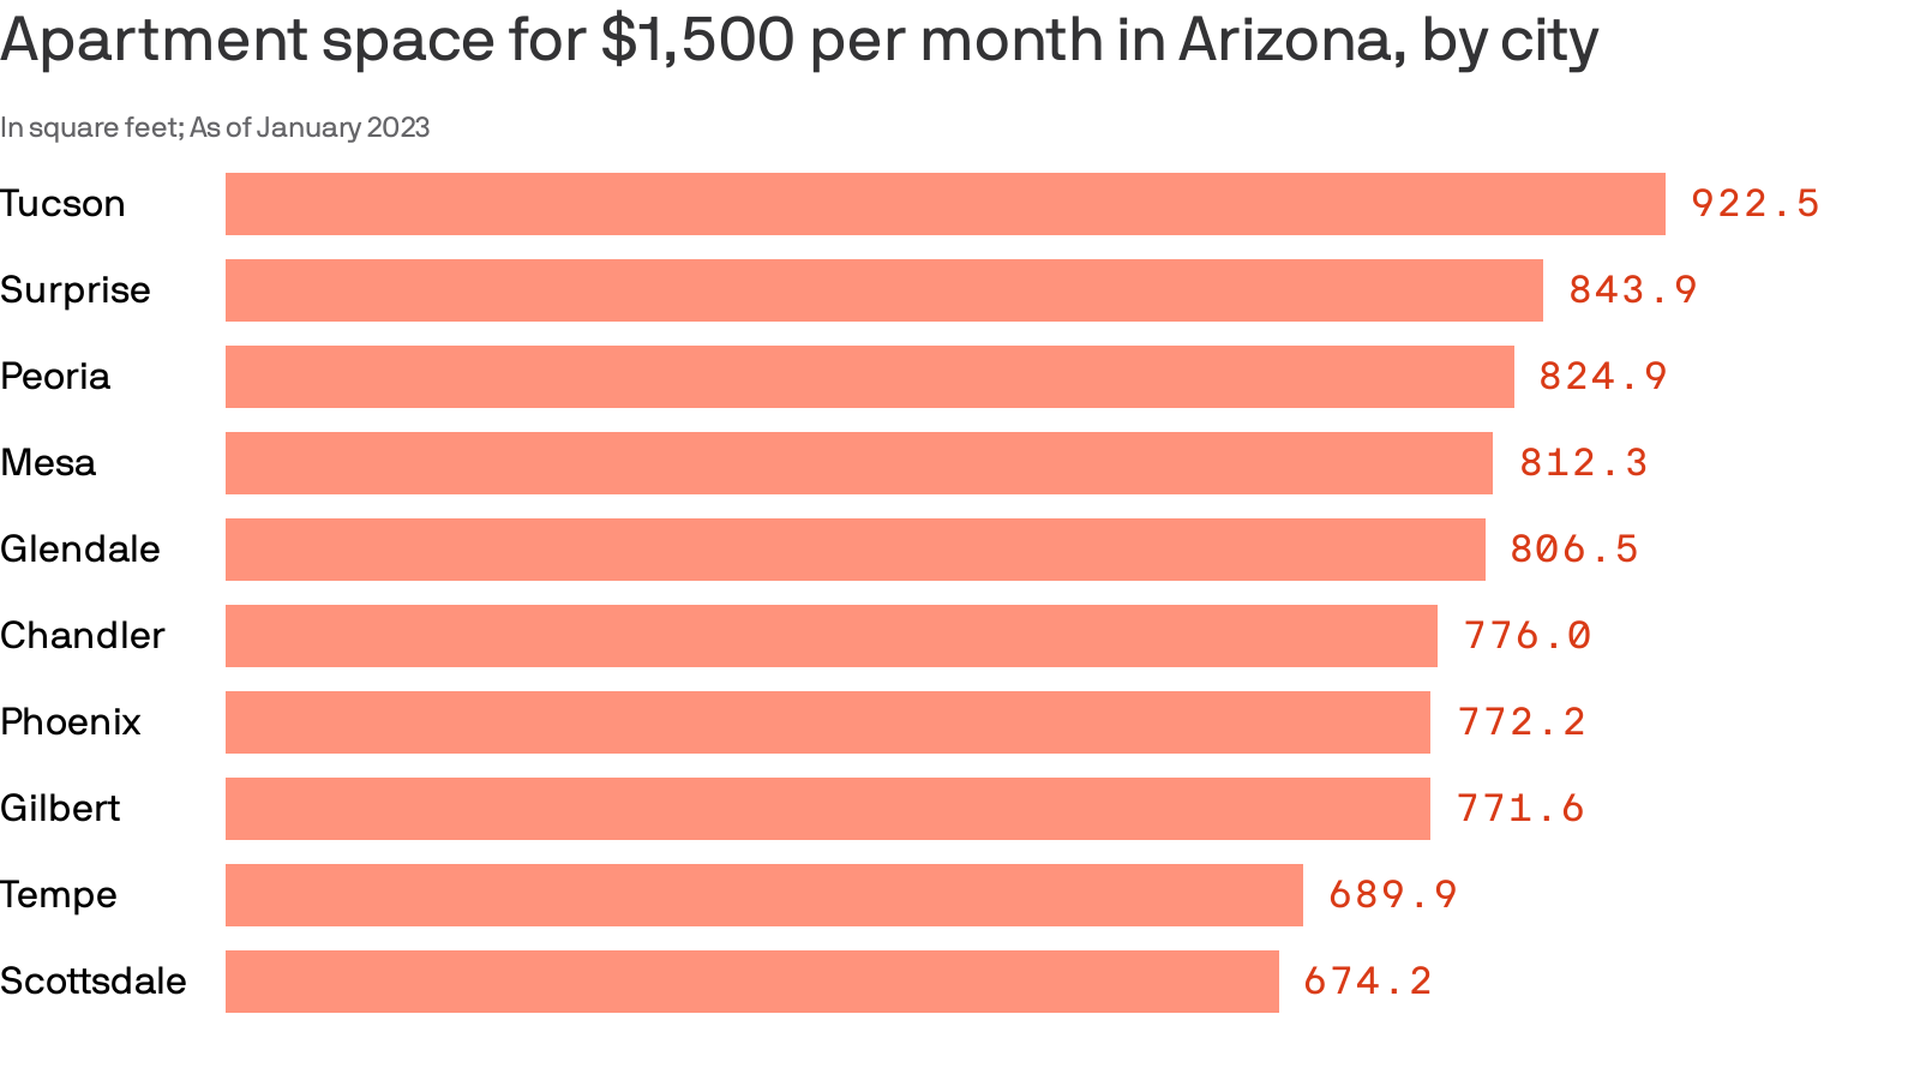 Apartment space for $1,500 per month in Arizona, by city.